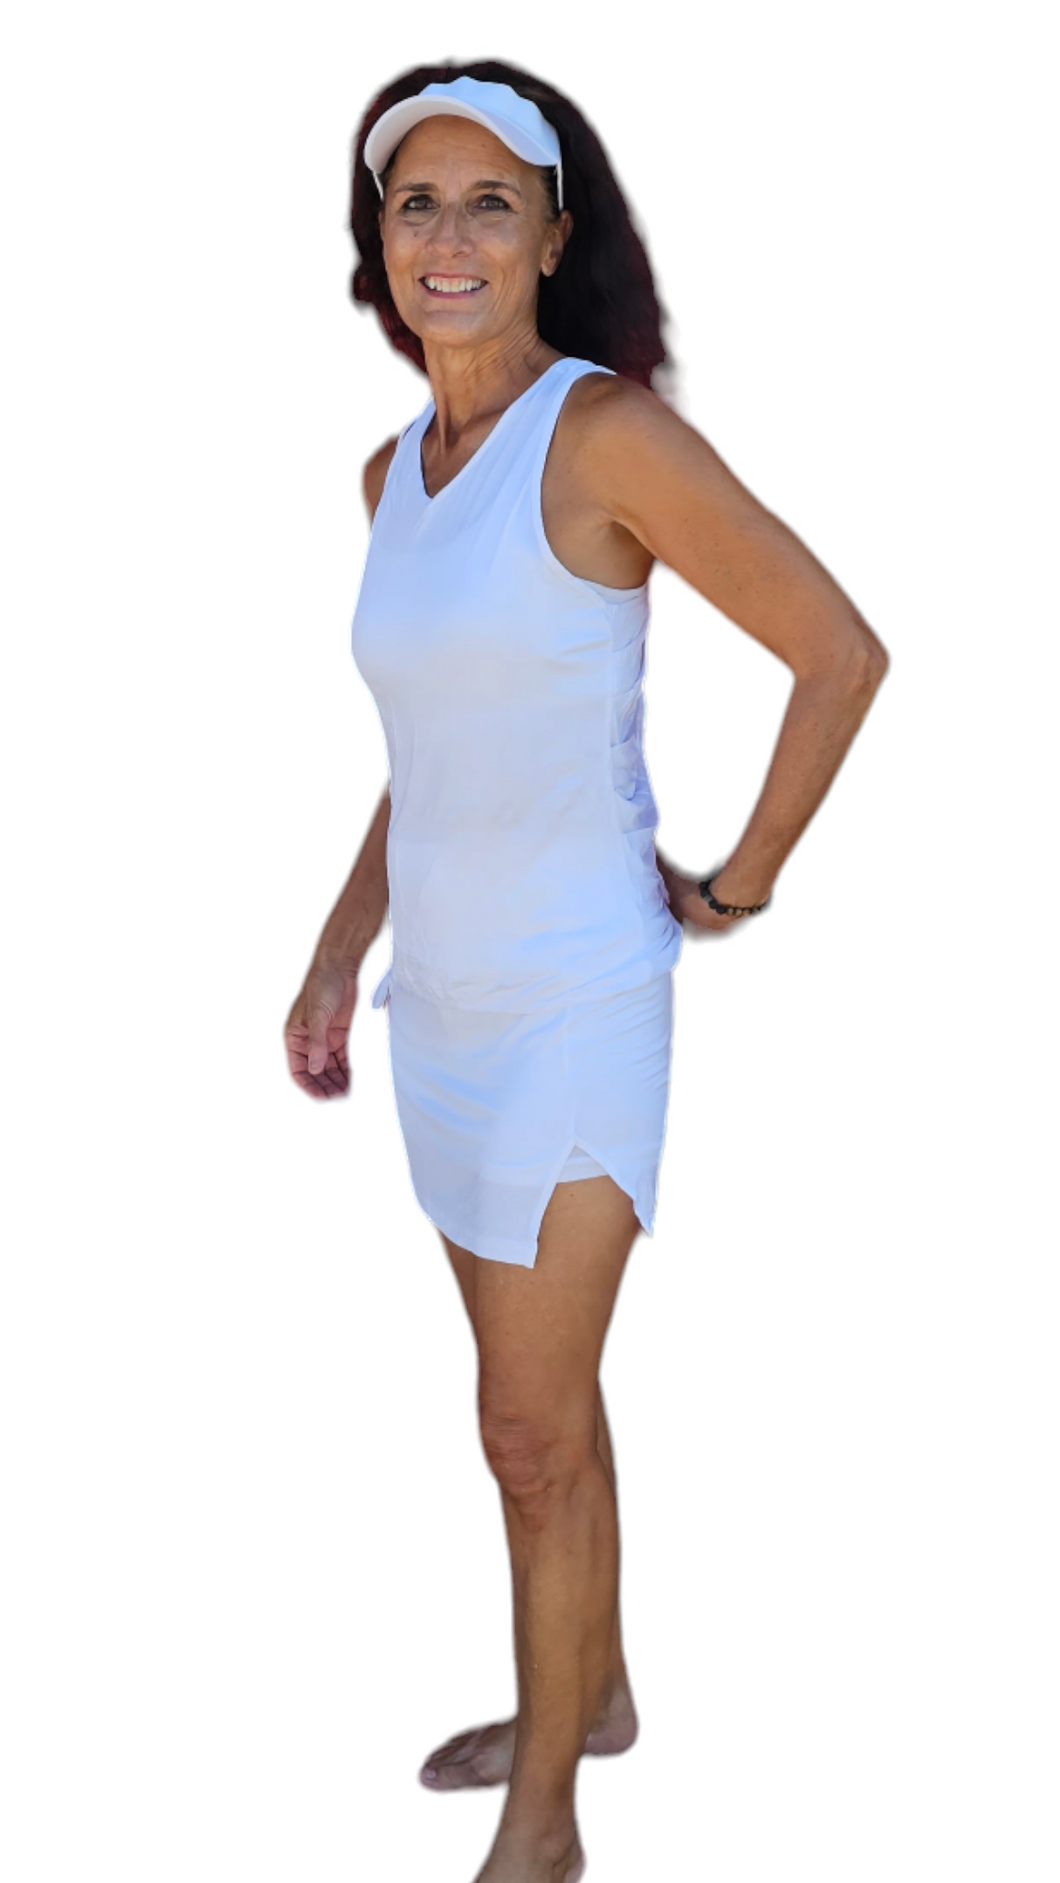 YOGAZ White Bamboo Skort the Softest, most breathable Skort you have ever worn IS HERE! Sizes Extra Extra Small to XXL